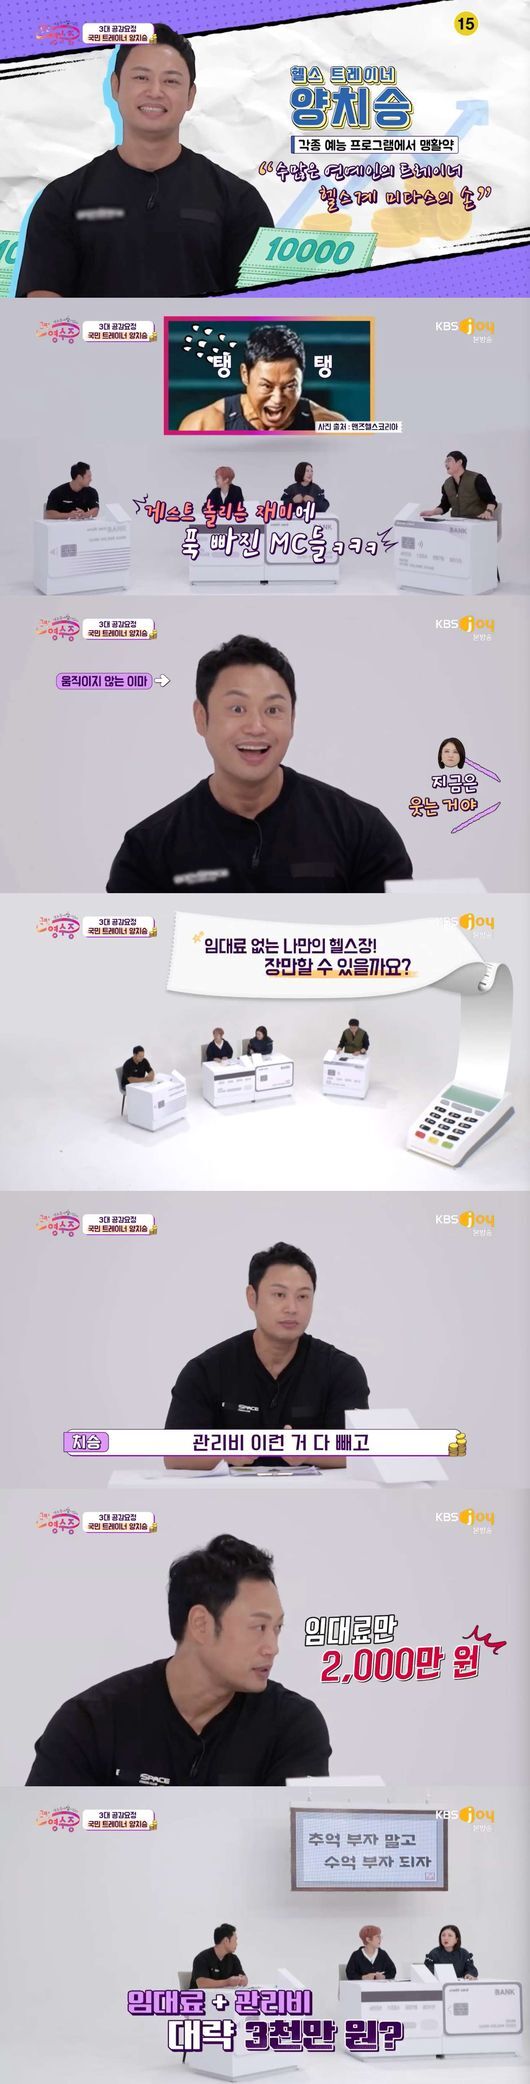 Sports trainer Yang Chi-seong has released his own consumption habits through National Receipt.In KBS Joy National Receipt broadcast on the afternoon of the 24th, Song Eun, Kim Sook, and Young Jin Park, who analyze the receipt of Yang Chi-seong, a gym director and trainer, were drawn.Yang Chi-seong said, I dont think Im good at managing money. I usually leave all the living expenses and India books to my wife and I only write.There is no investment such as savings, investment, real estate, etc. He confessed that he had no special money management secret.The troubles of National Receipt Yang Chi-seong were clear.The Rent Is Too Damn High Party of gym currently operating in Gangnam District is borne by the company; Yang Chi-seong said, Gangnam District operates gym.I want to have my own gym that does not have a Rent Is Too Damn High Party even if it is only one floor, he said.But the reality wasnt easy: Yang Chi-seong said, What happens to the Wall Rent Is Too Damn High Party?Gangnam District is using two floors in the yolk land.Rent Is Too Damn High Party If you tell me, it is 20 million won except for all of these things. In particular, Yang Chi-seong mentioned the burdensome Rent Is Too Damn High Party, saying, If you add the management fee, it will be about 30 million won. Kim Sook said, When the gym business became difficult with Corona 19, I went to the front of the employees house and took care of my salary.In addition, National Receipt Young Jin Park looks at the Receipt of Yang Chi-seong, which has a clothes price of 370,000 won, a food cost of 550,000 won, and a alcohol price of 580,000 won for about two weeks. The pleasure is 30 minutes, but the suffering is 30 days.If you go beyond the esophagus, it is a waste. Beer can not taste and it is urine. Yang Chi-seong said, I think we should reduce beer spending. I can not argue. I buy 8 cans, but now I have to buy 4 cans.On the other hand, KBS Joy National Receipt is an Indian entertainment program that provides analysis and customized solutions to the representative of the entertainment industry and the Indian Advisory Committee by receiving the clients Receipt.KBS Joy National Receipt